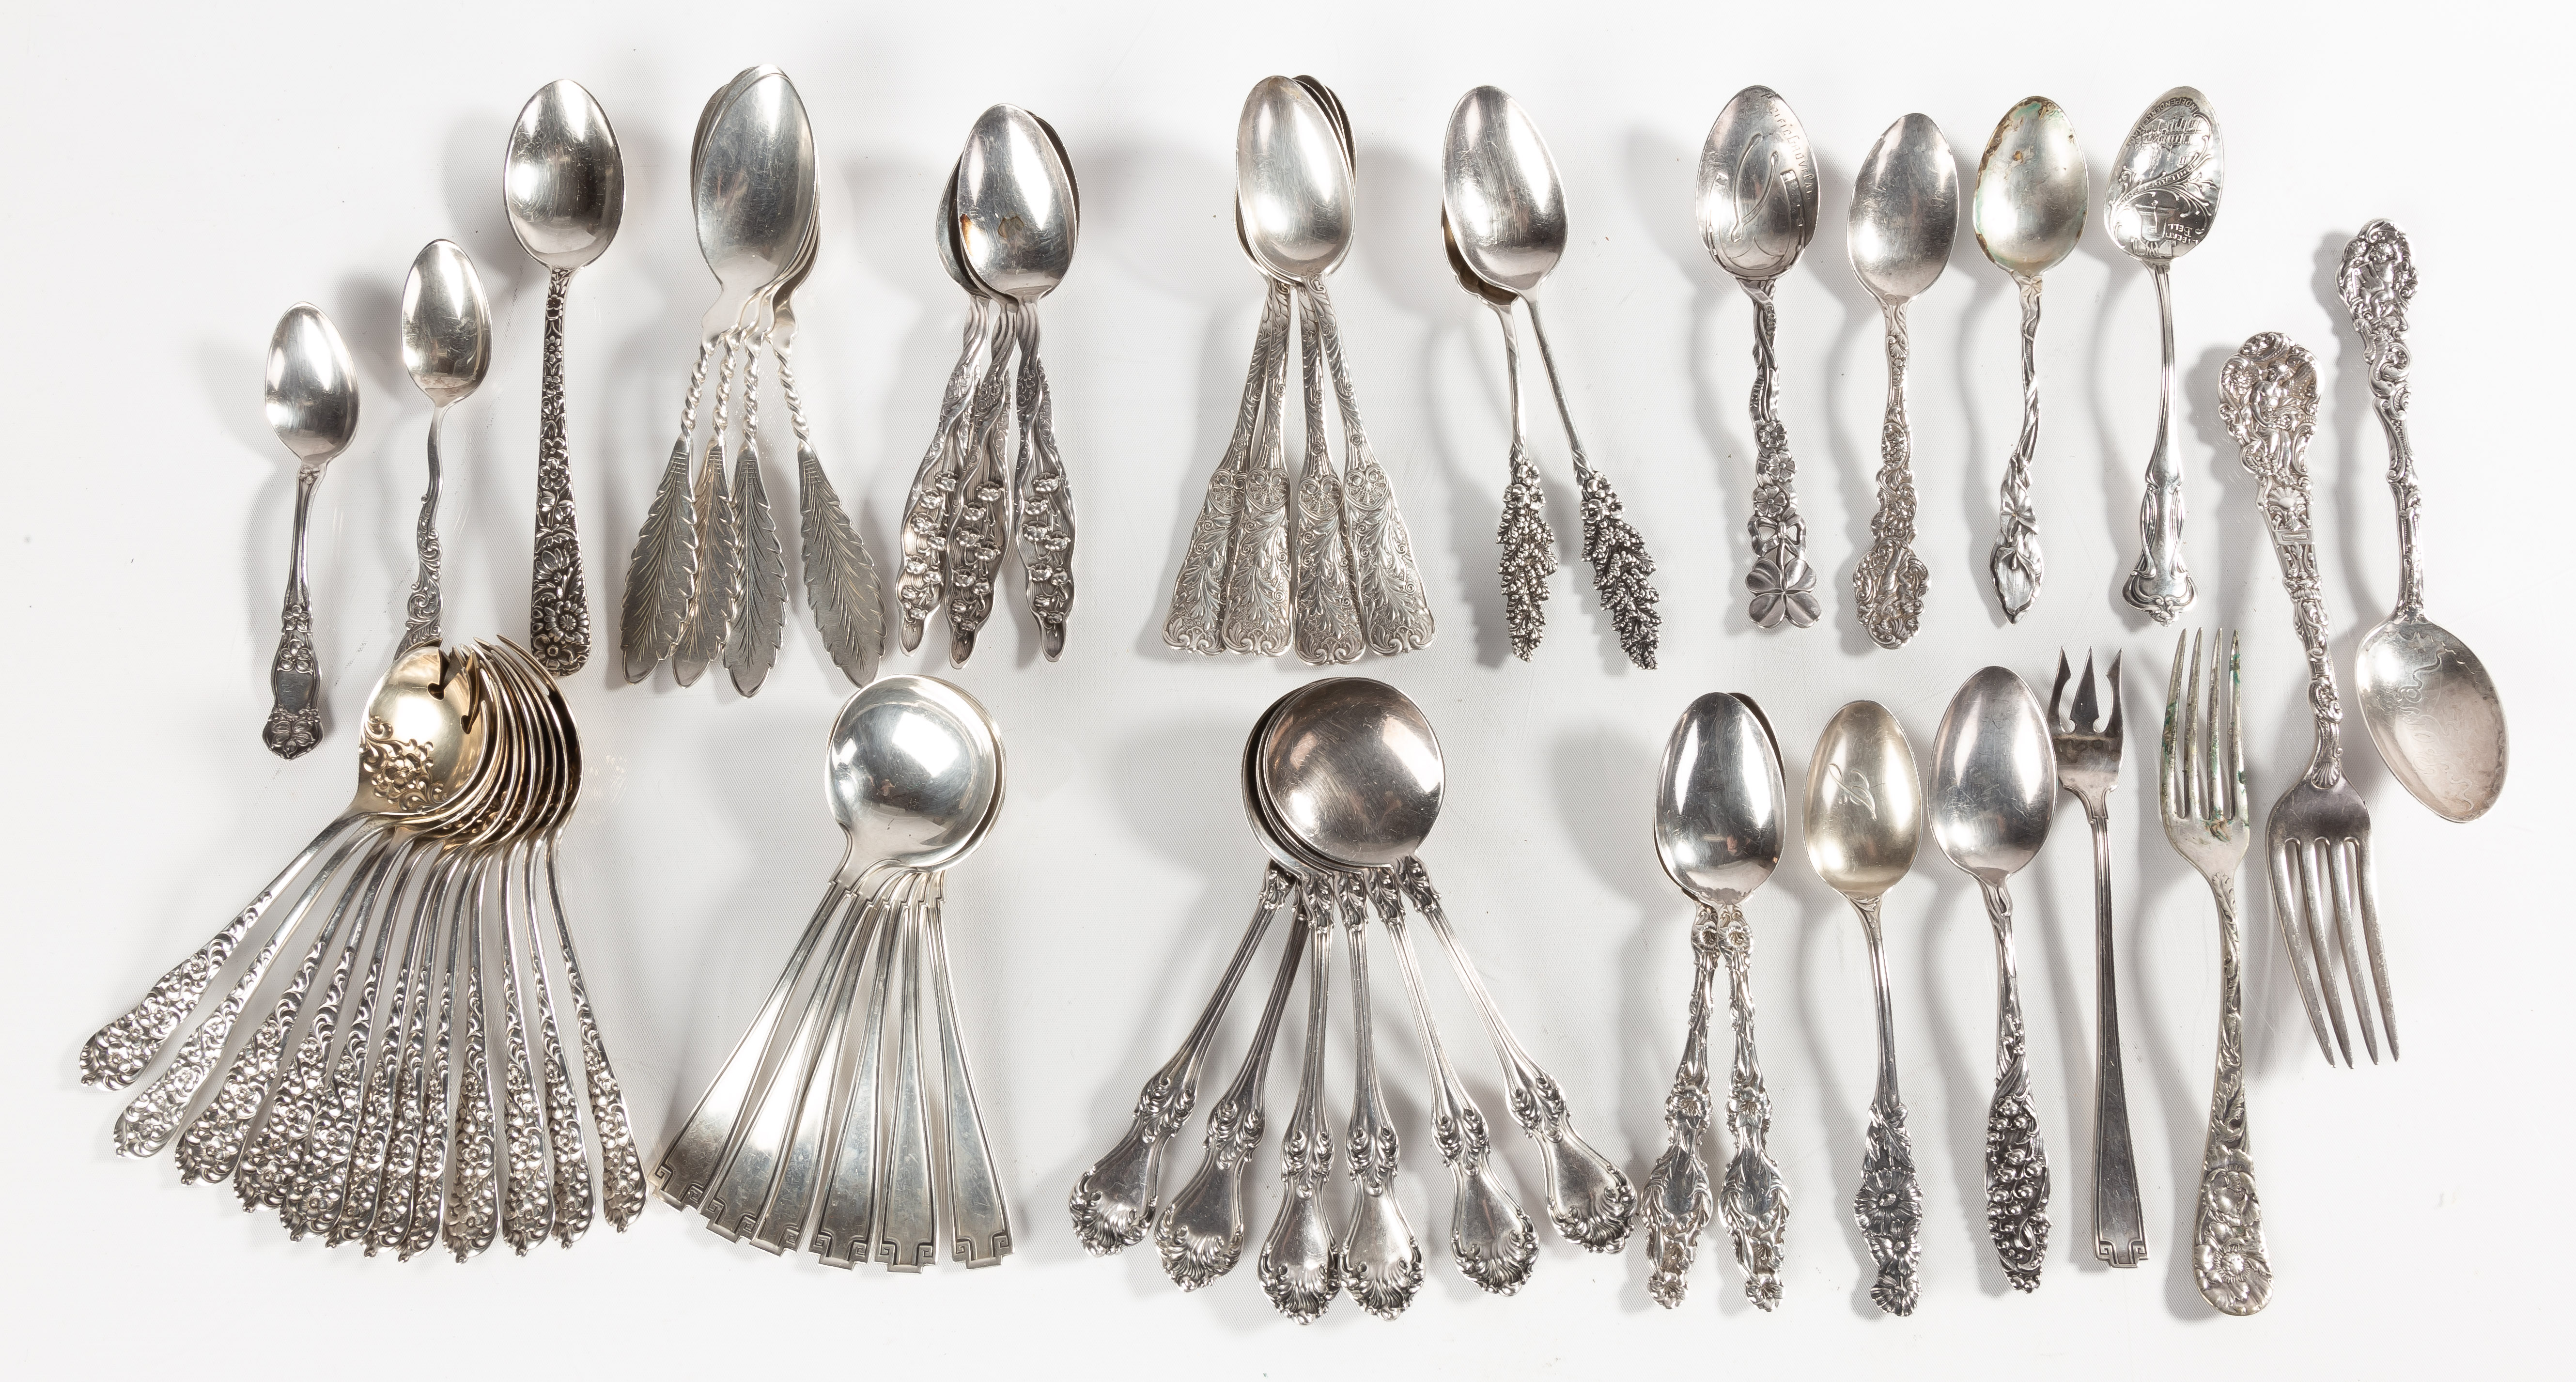 STERLING SILVER FLATWARE Weight: